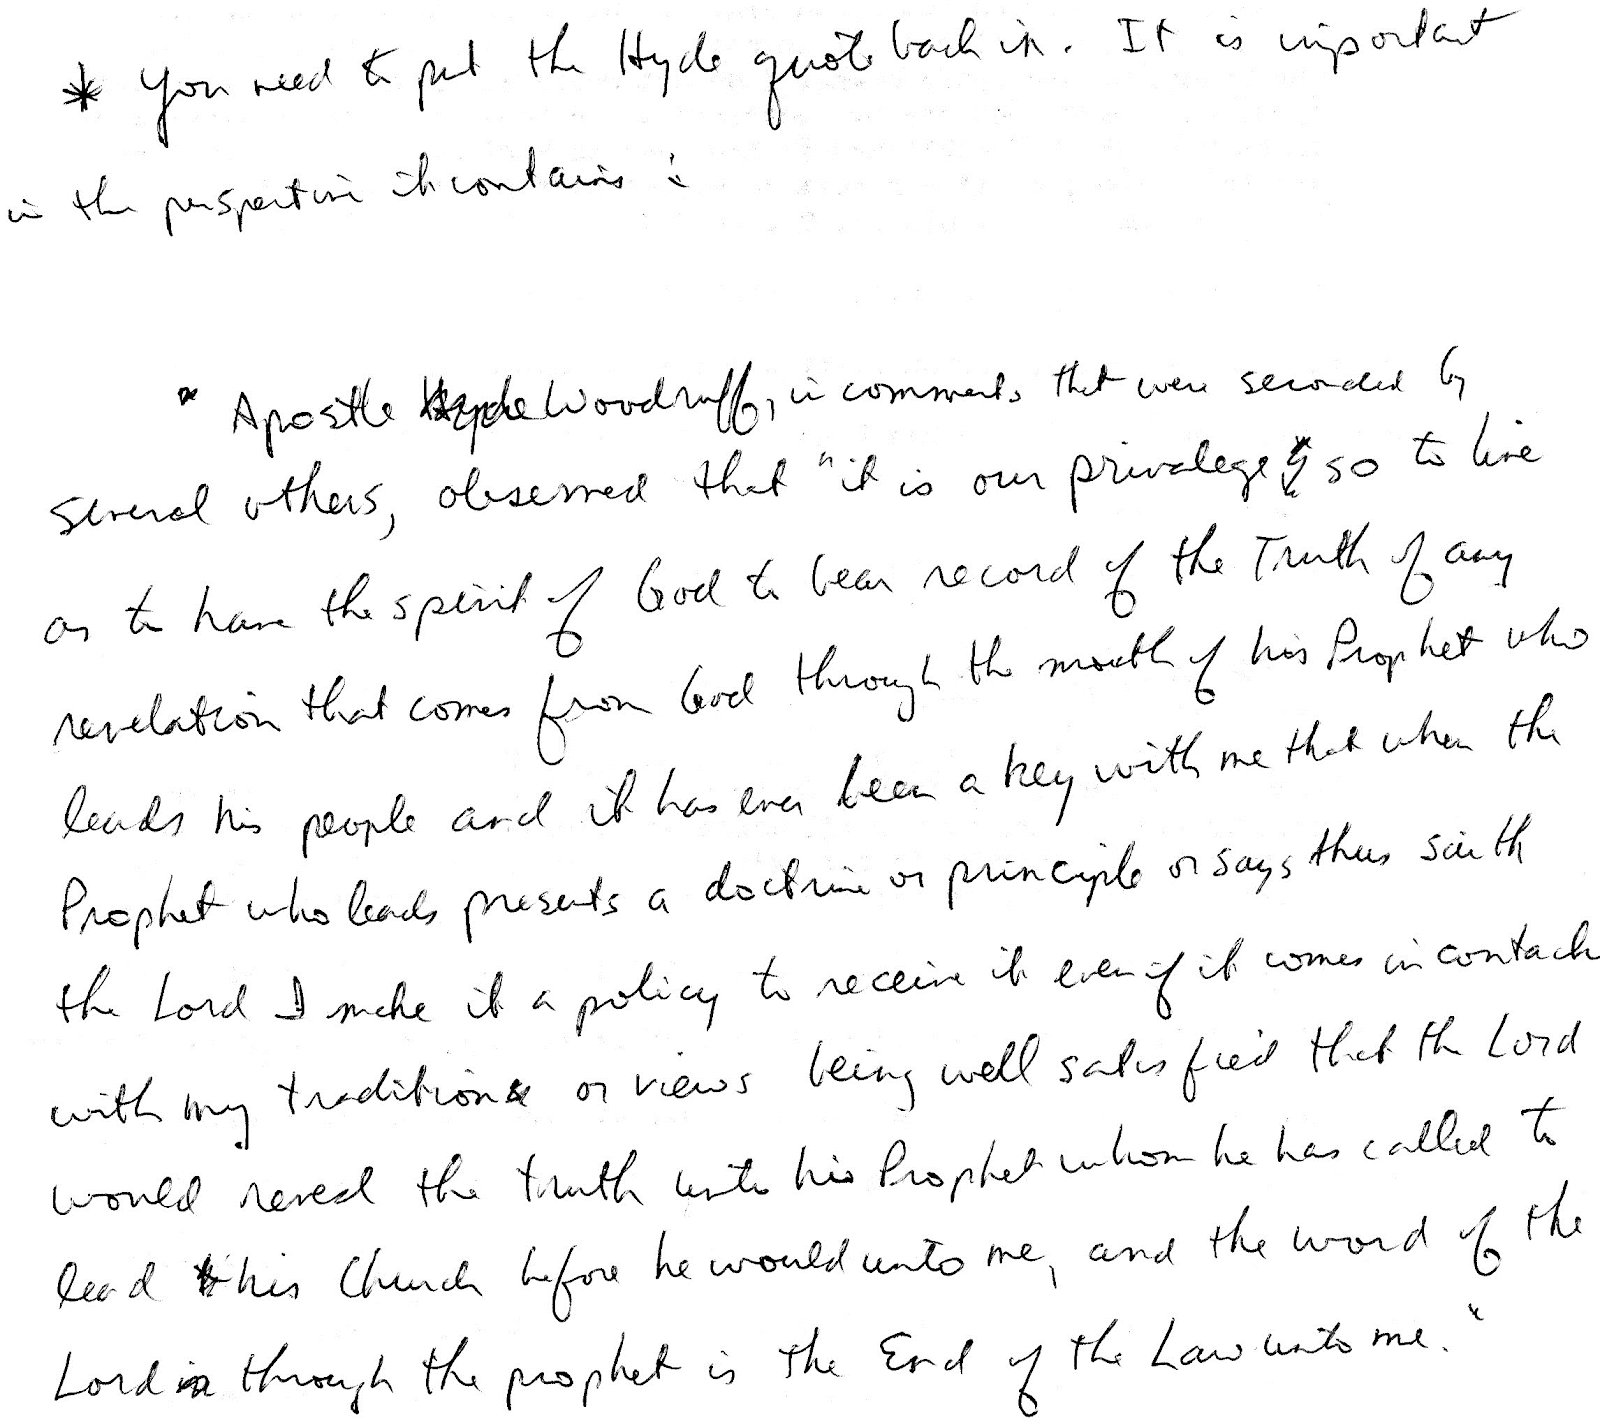 A close up of a letter

Description automatically generated